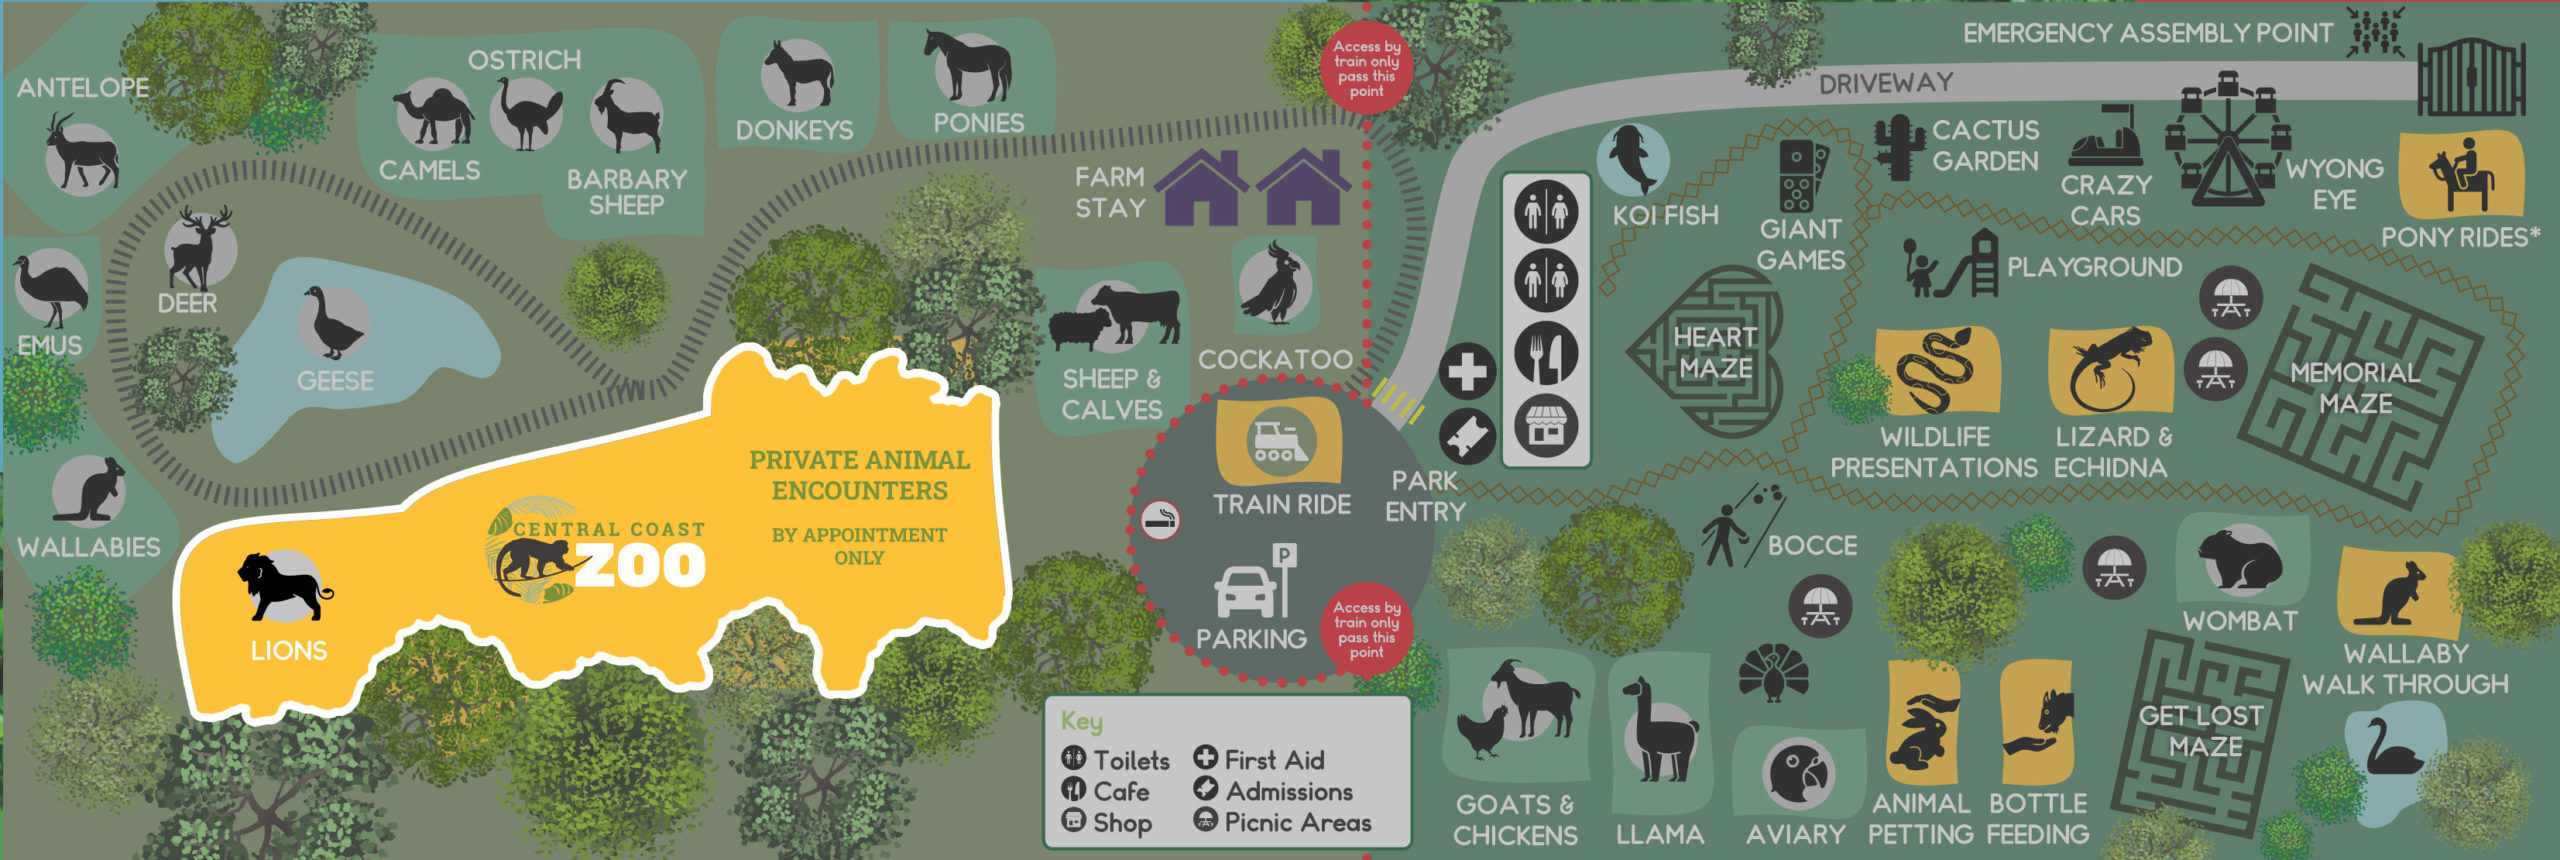 Central Coast Zoo Map